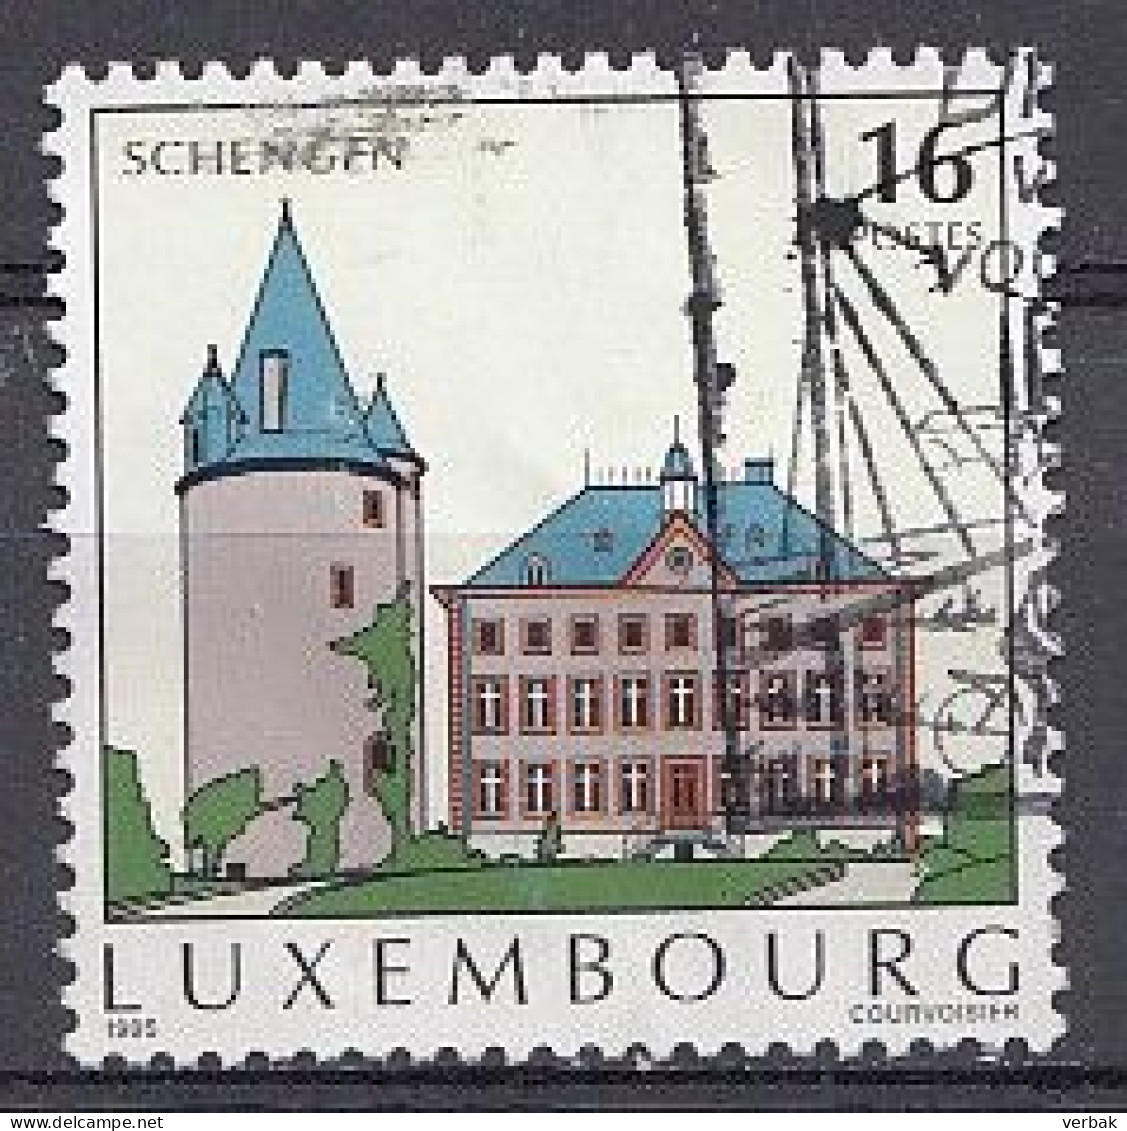 Luxembourg 1995  Mi.nr.:1376  Sehenswürdigkeiten  Oblitérés / Used / Gestempeld - Used Stamps